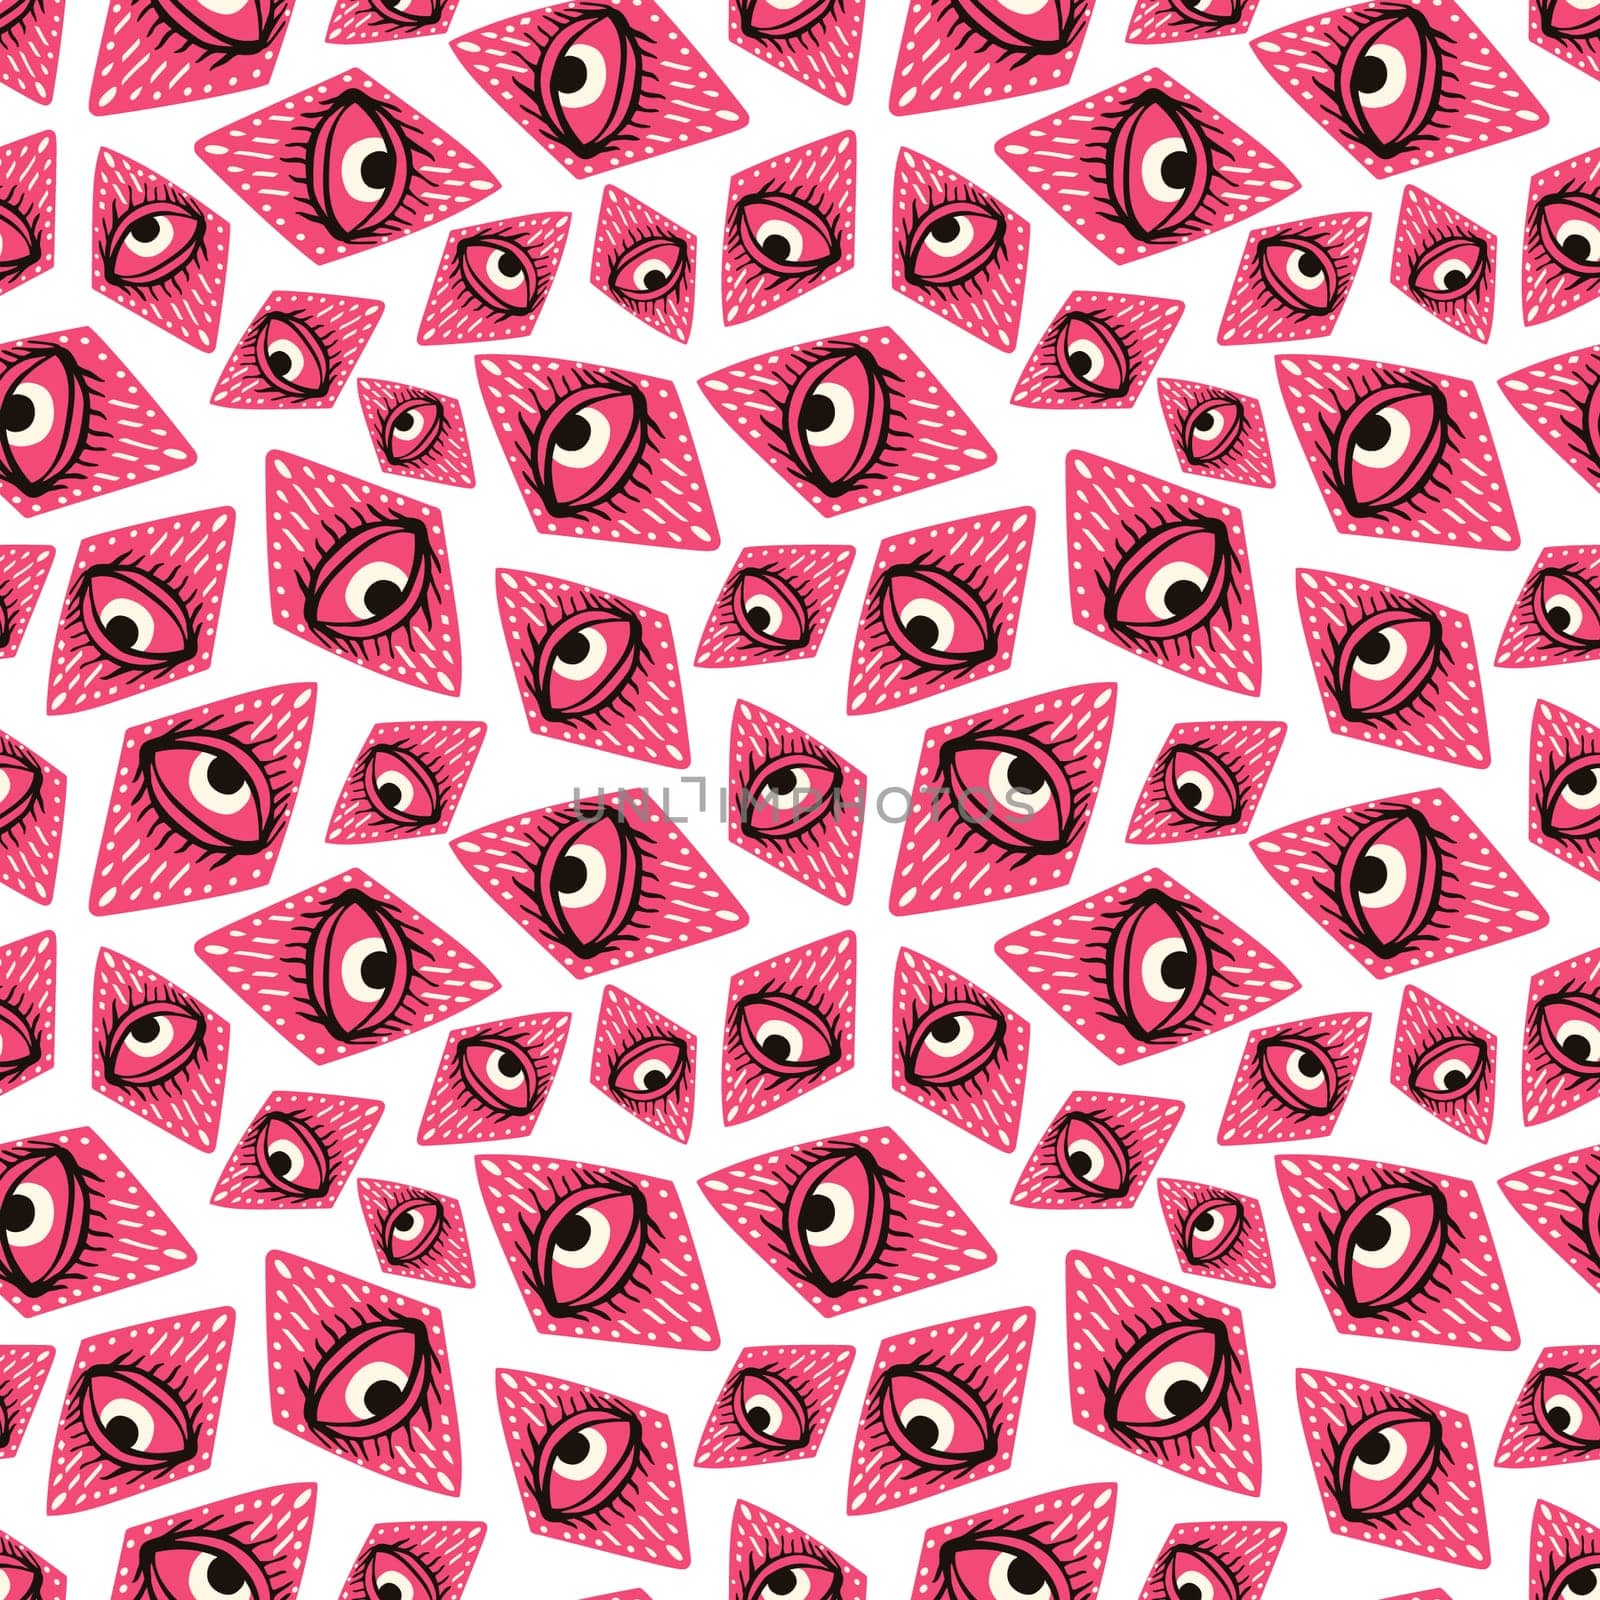 Purple and pink seamless pattern with magical eyes by Dustick